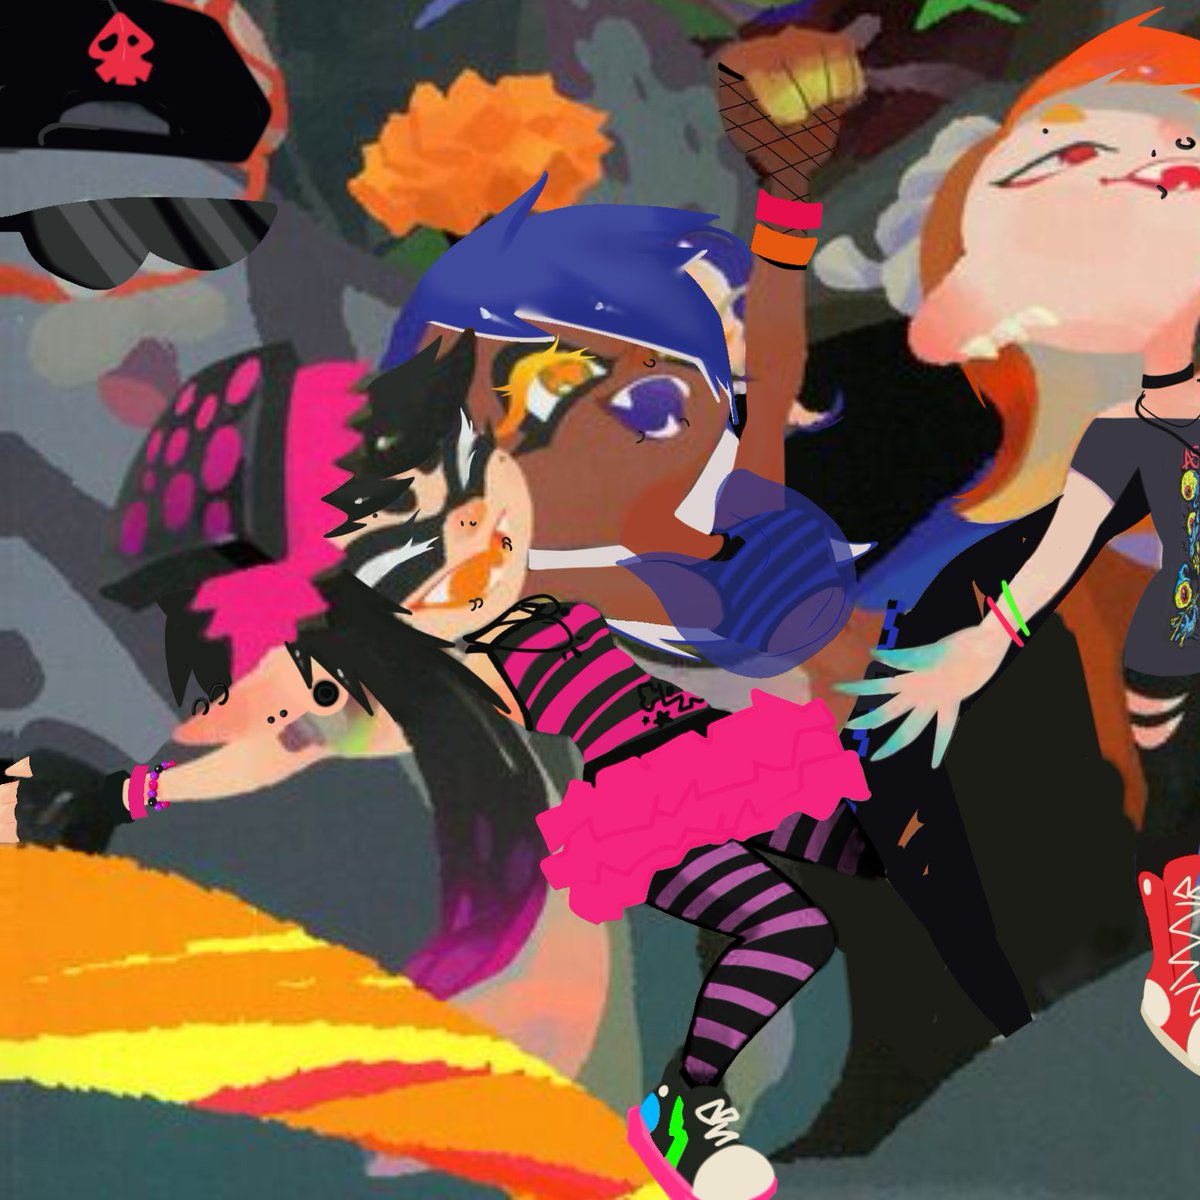 reposting these old scene deepcut and squid sisters edits i made